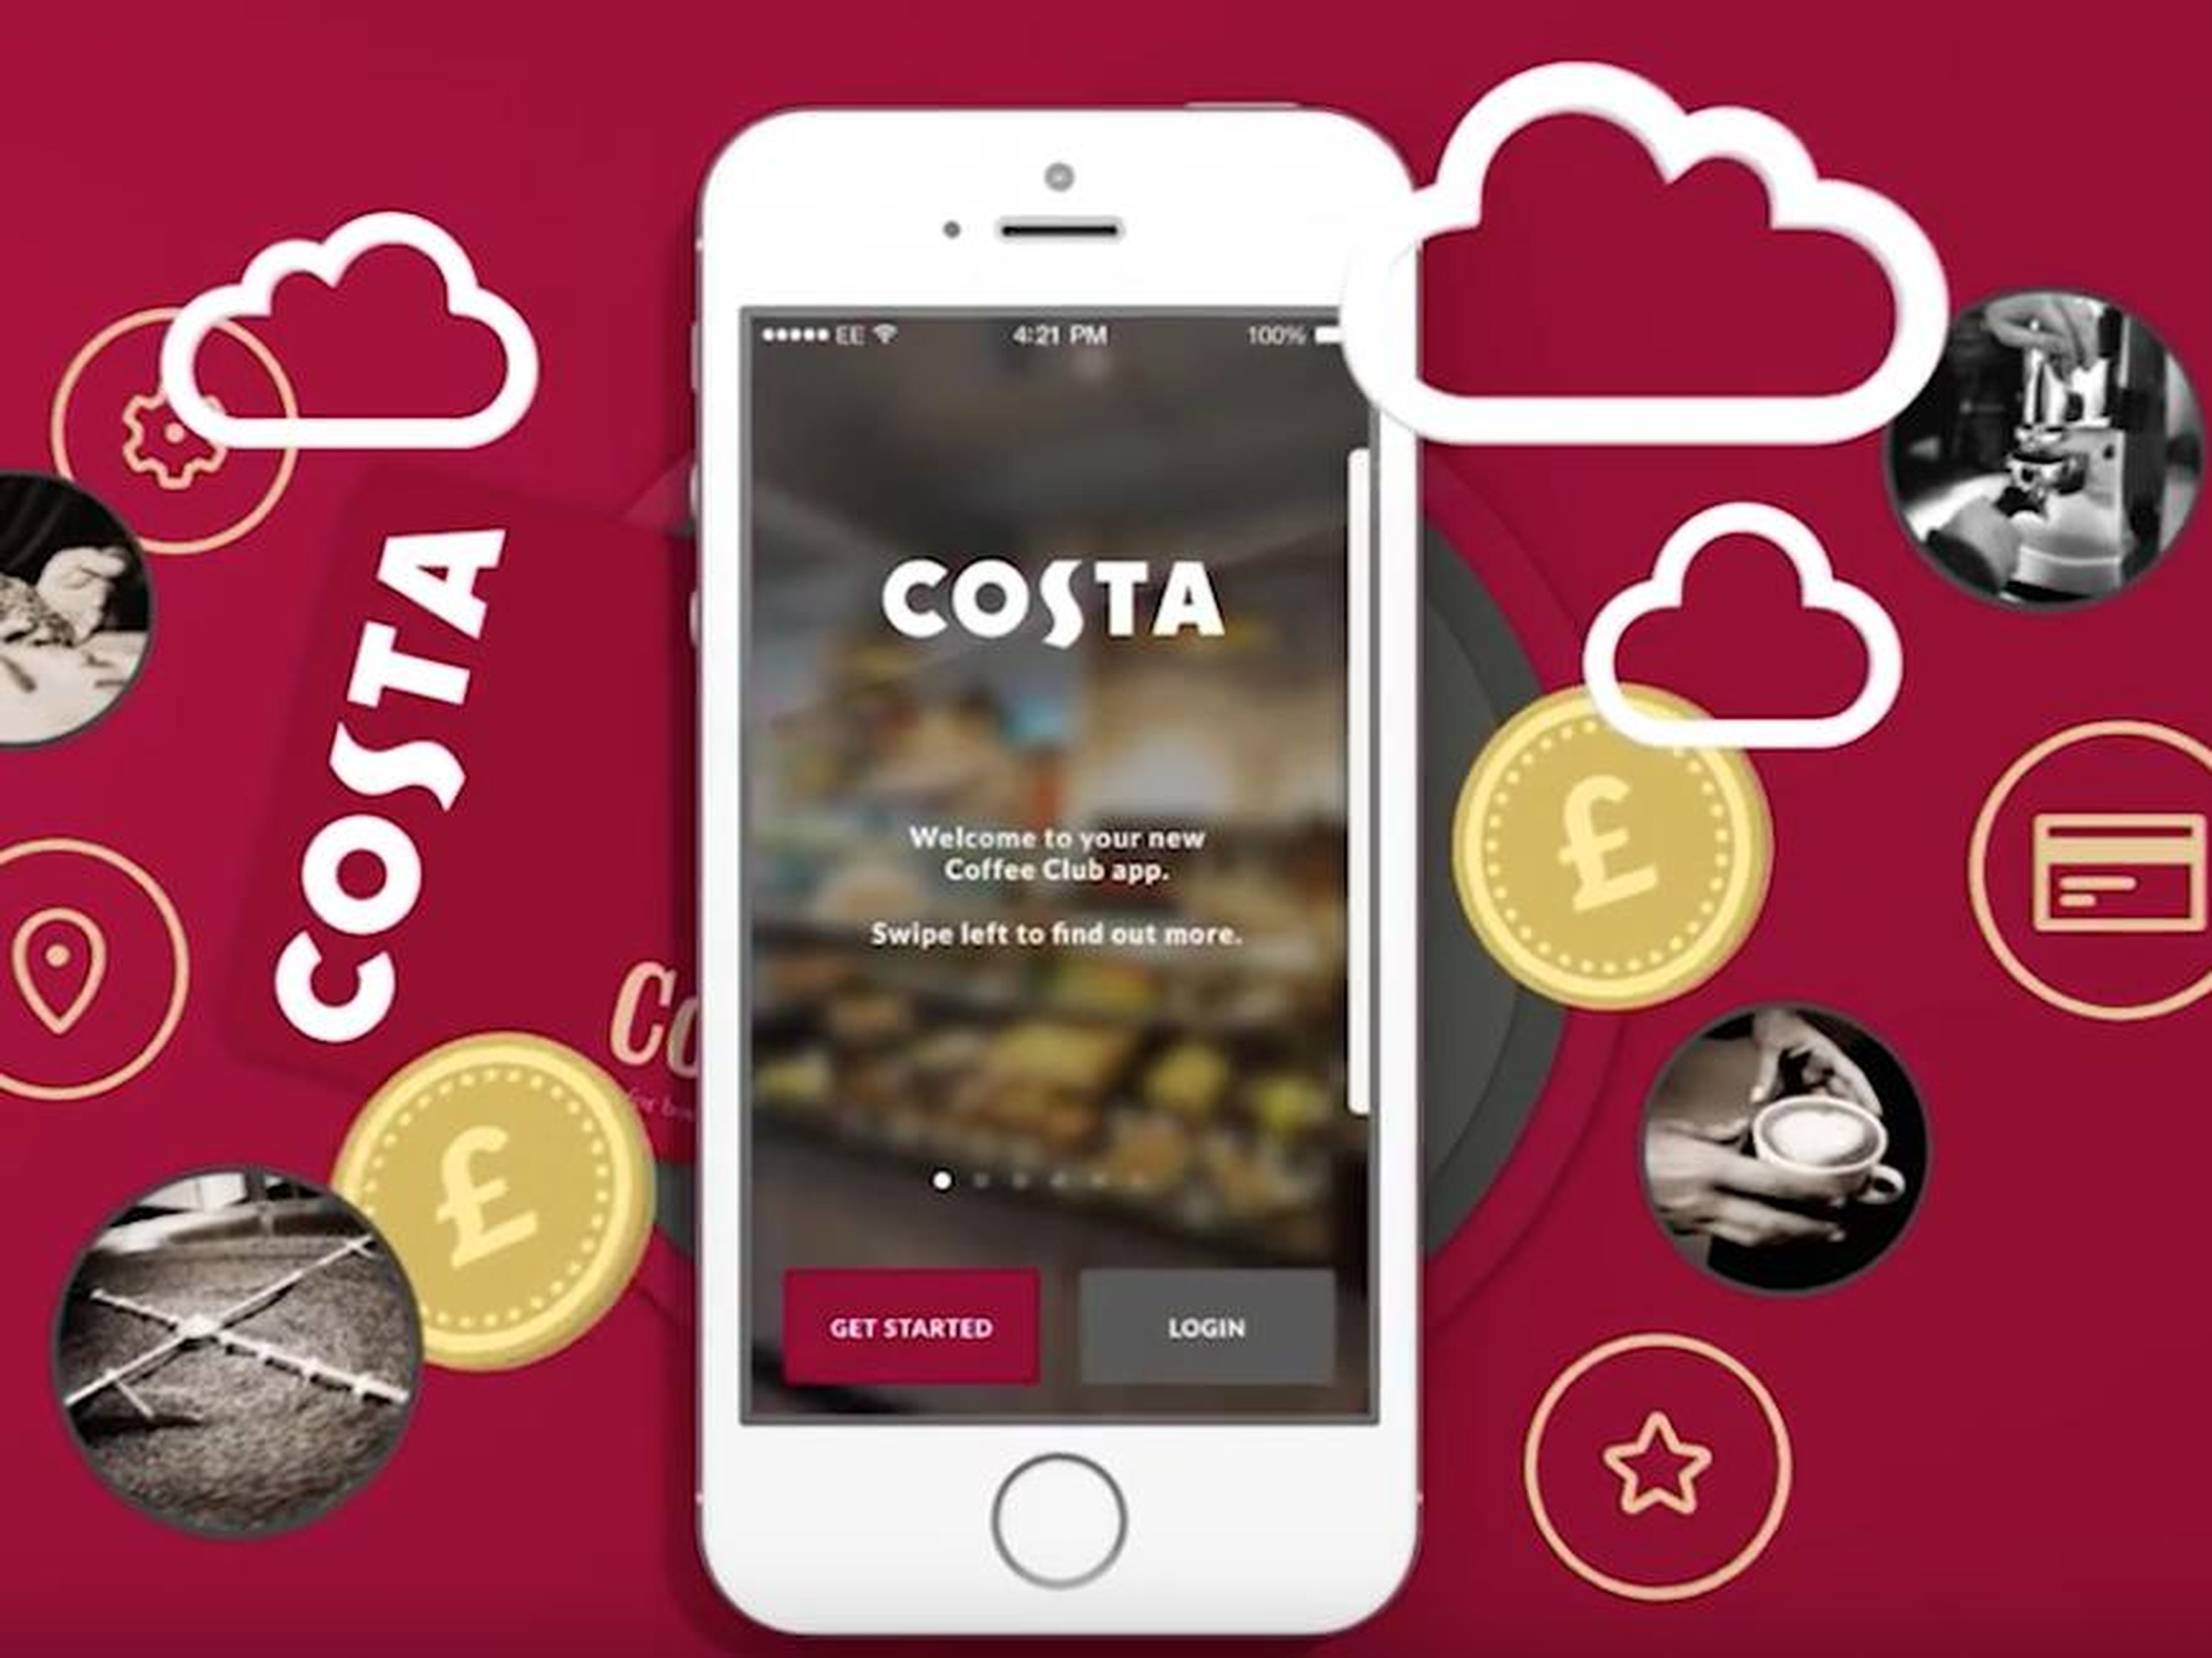 Costa doesn't offer a mobile-ordering service, but you can use its app to find local stores and collect loyalty points.